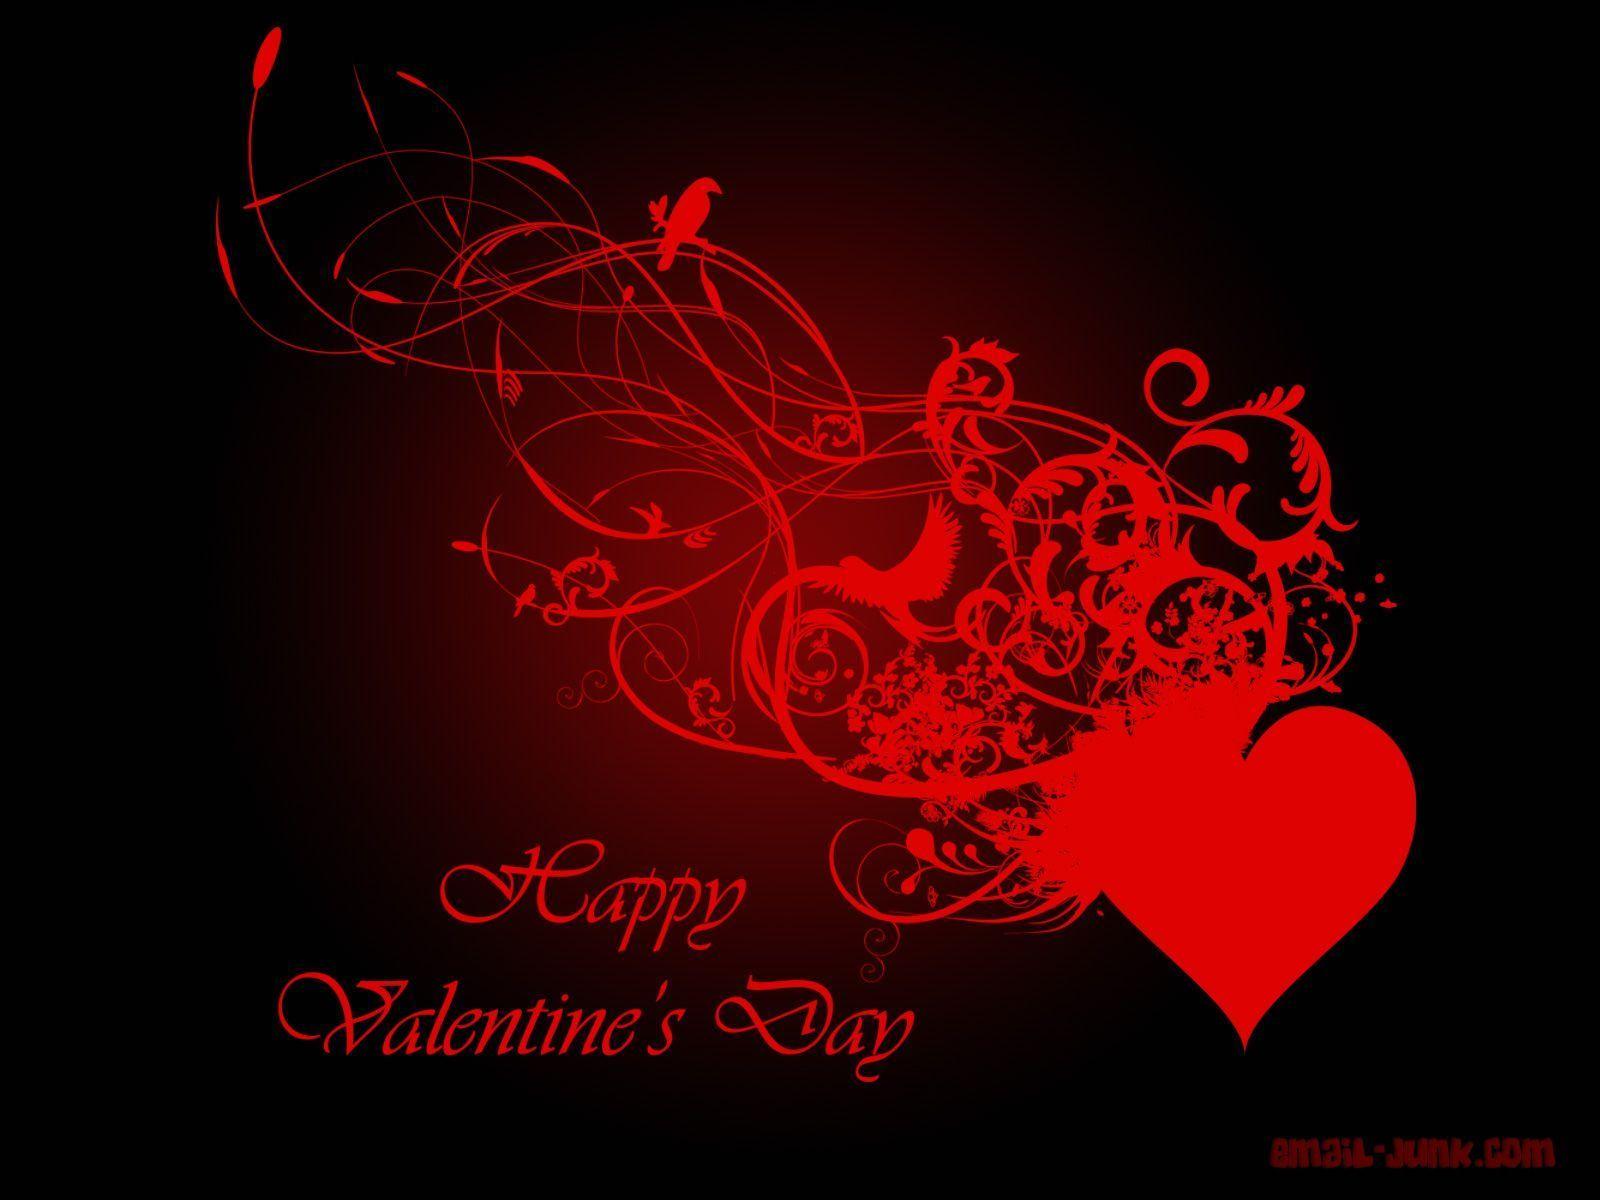 Valentines Day Wishes Wallpaper HD. High Definition Wallpaper